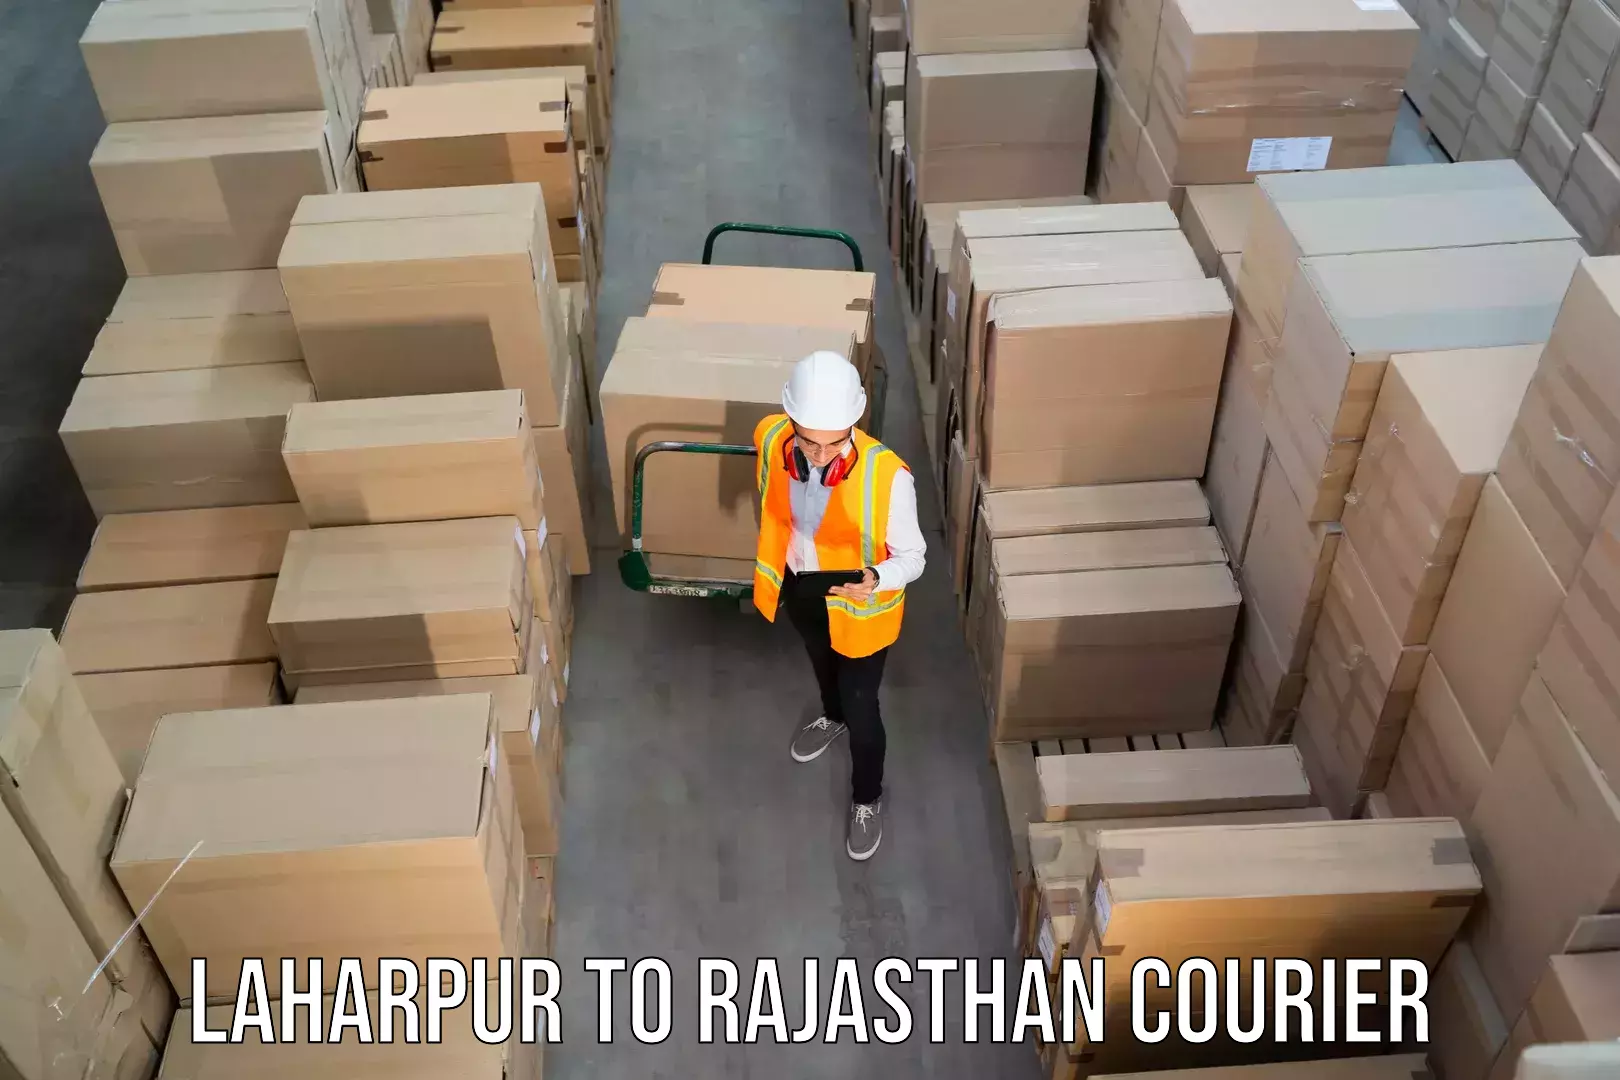 Professional courier handling Laharpur to Yeswanthapur